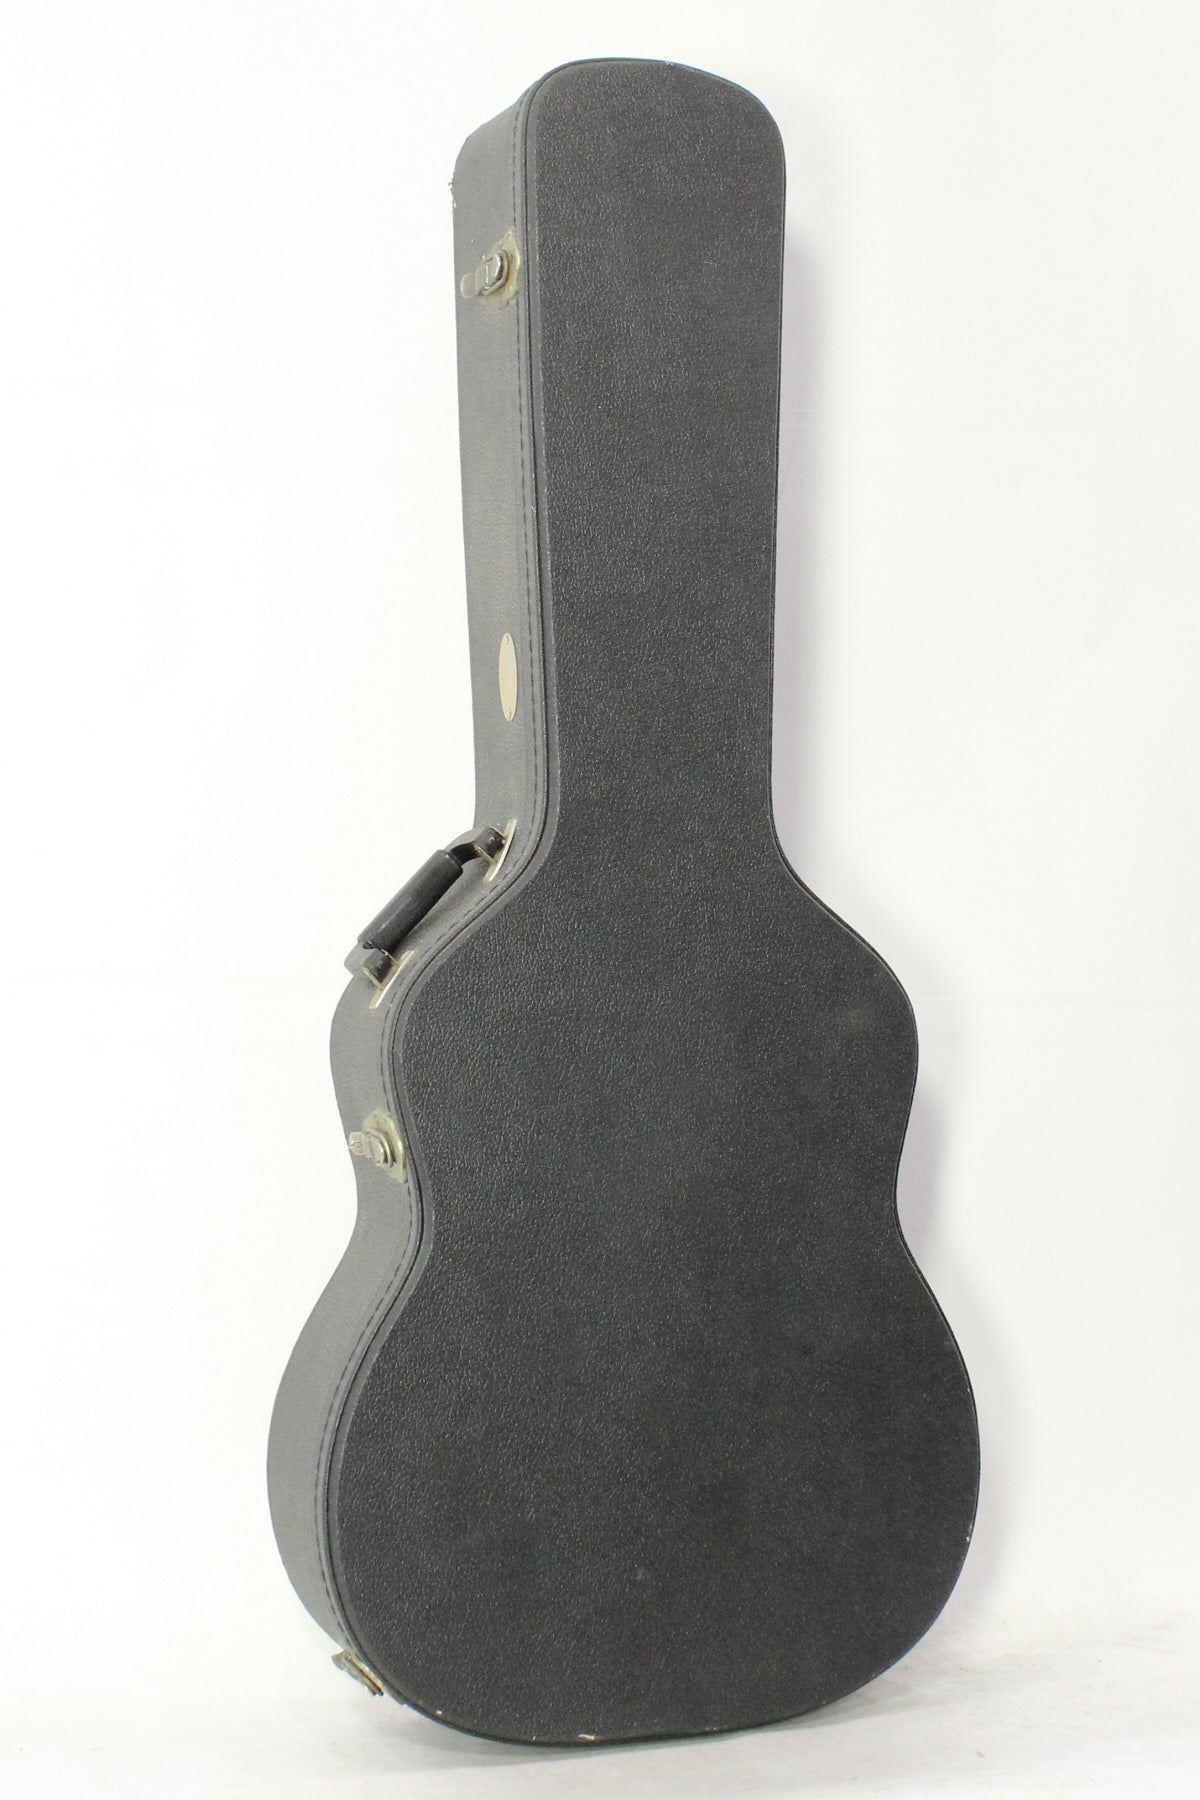 [SN 880318] USED Martin / 000-15 made in 2002 [09]